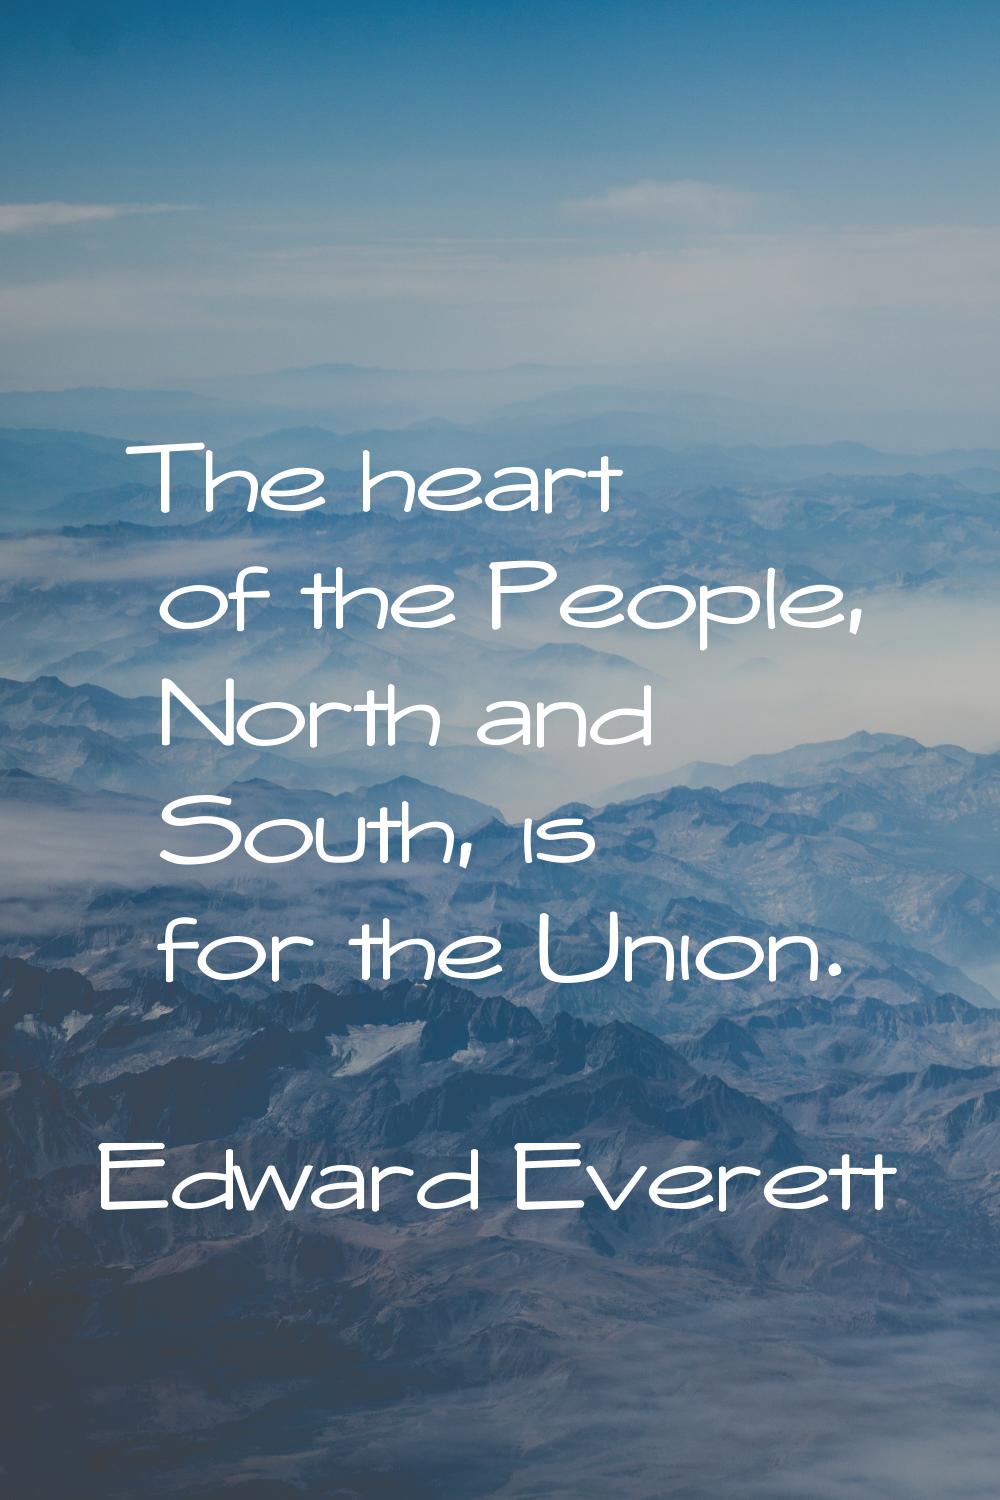 The heart of the People, North and South, is for the Union.